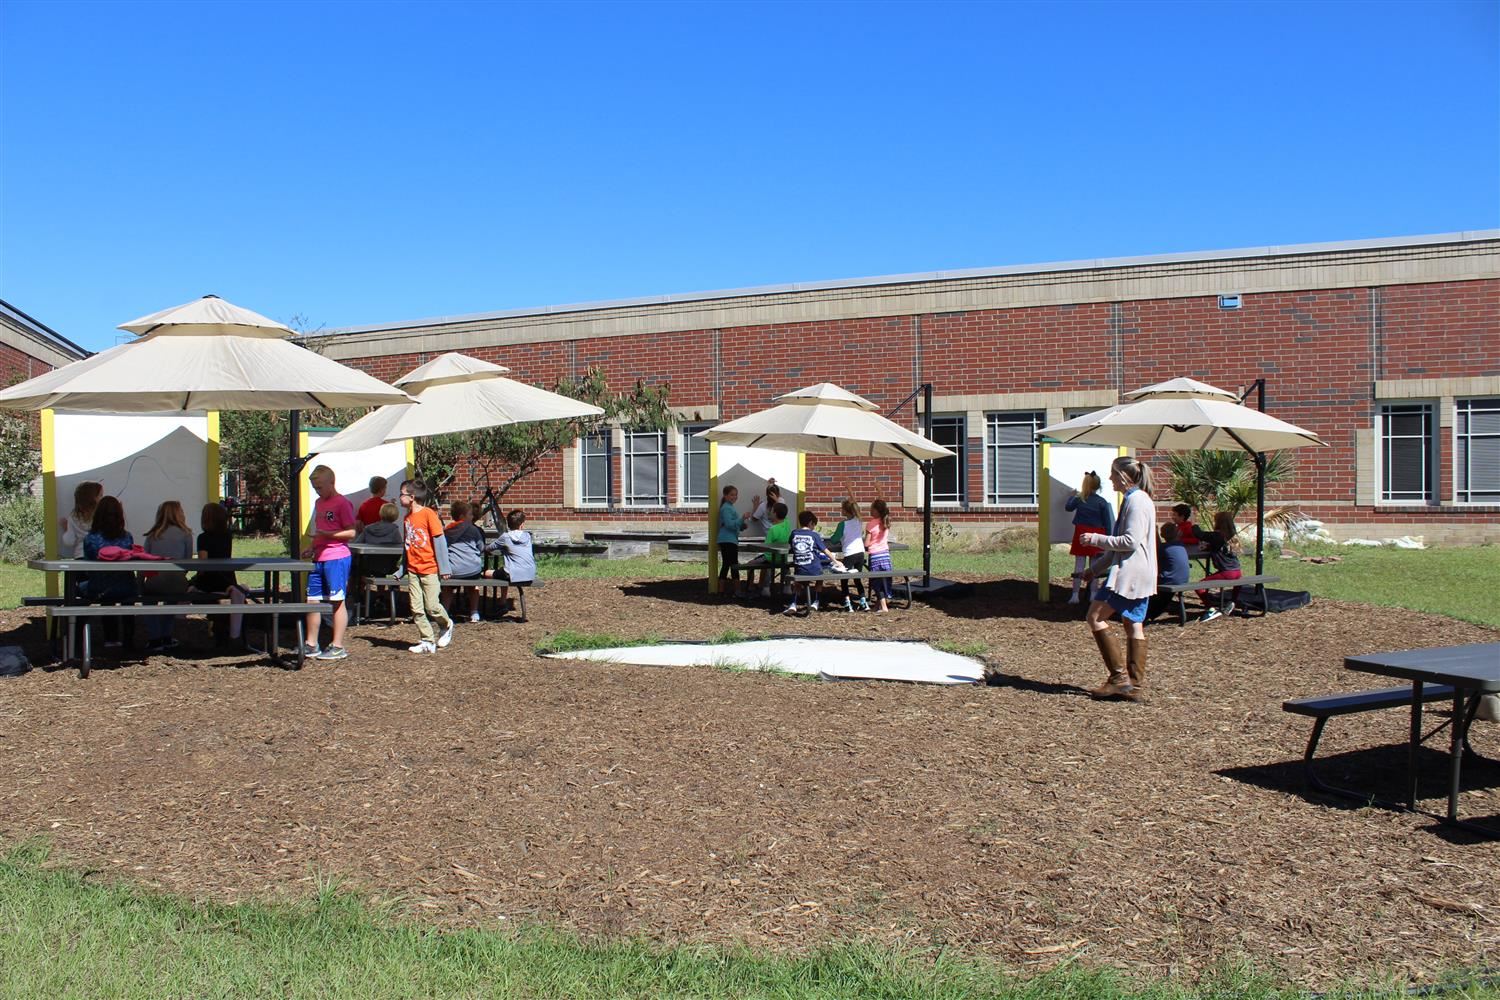 students learning in outdoor classroom